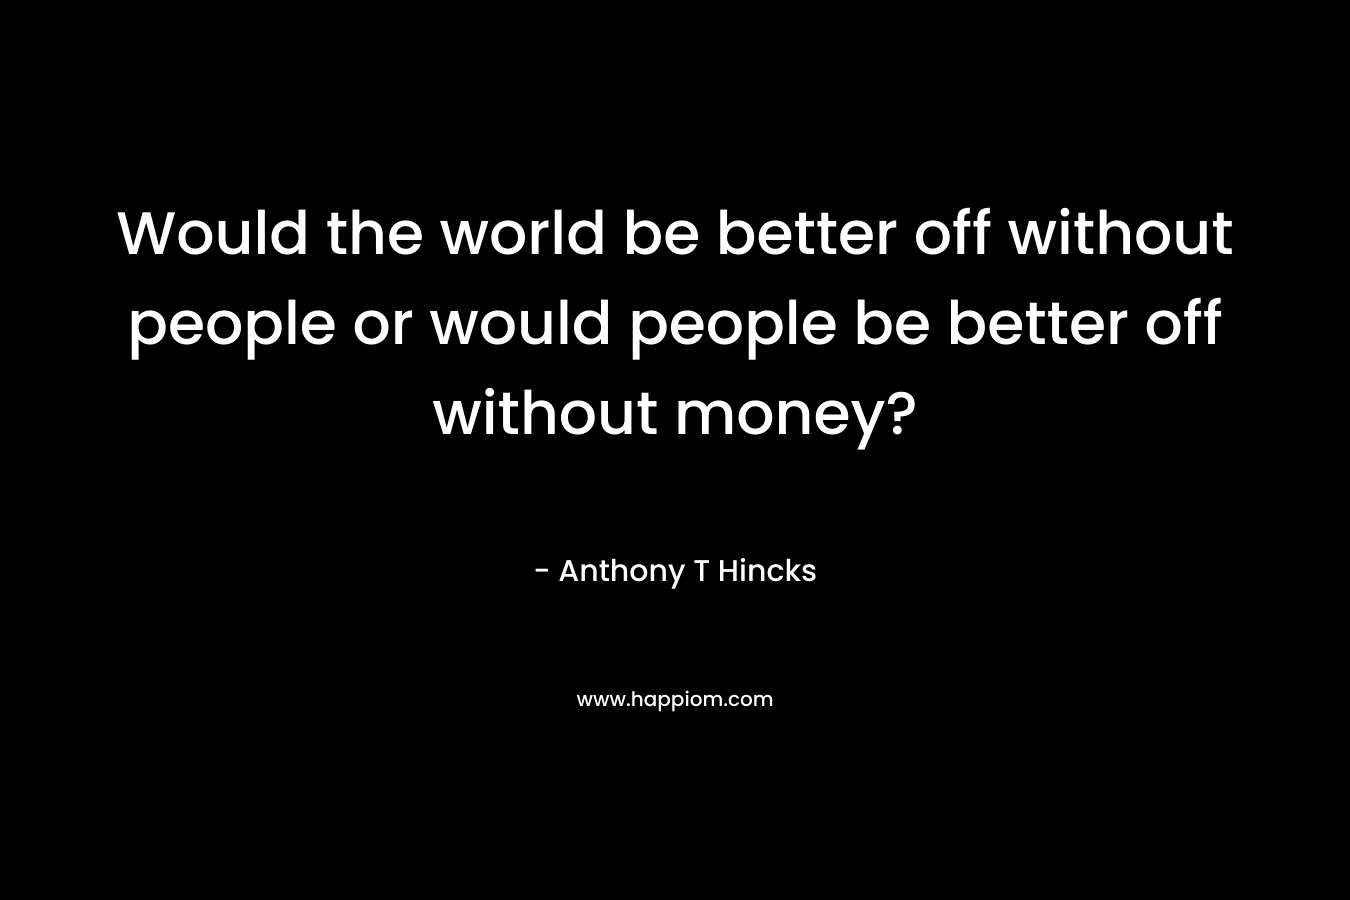 Would the world be better off without people or would people be better off without money?